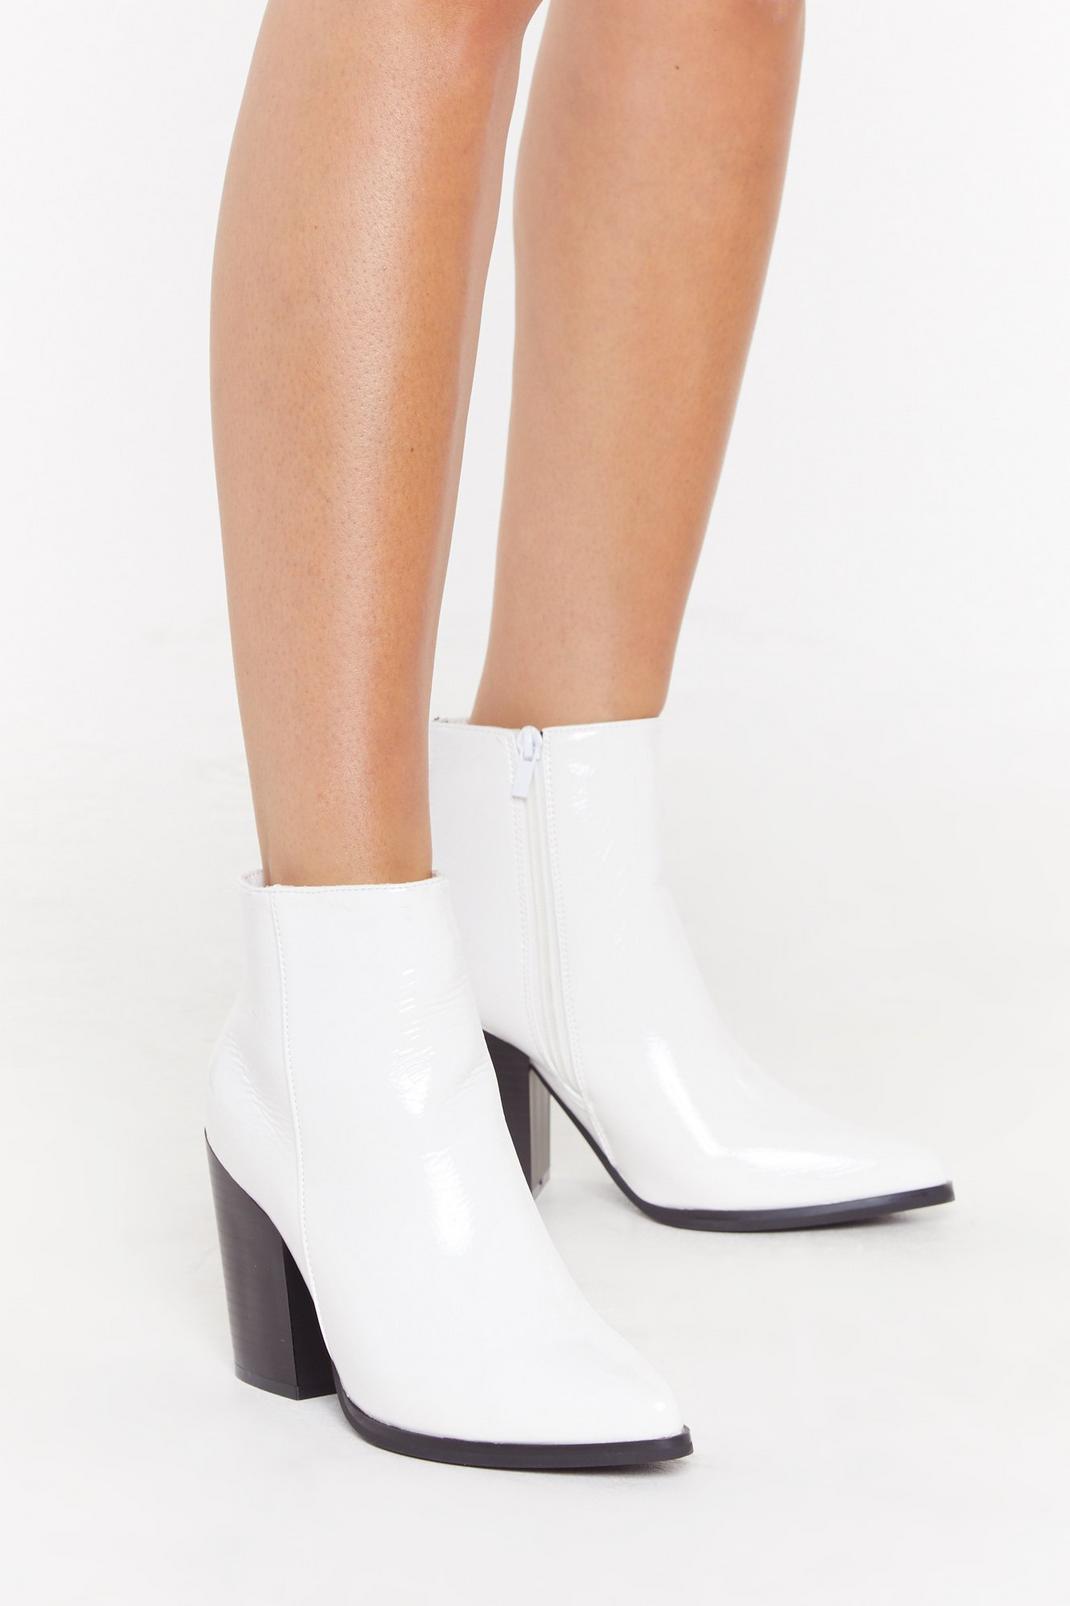 What's Your Ankle Patent Heeled Boots